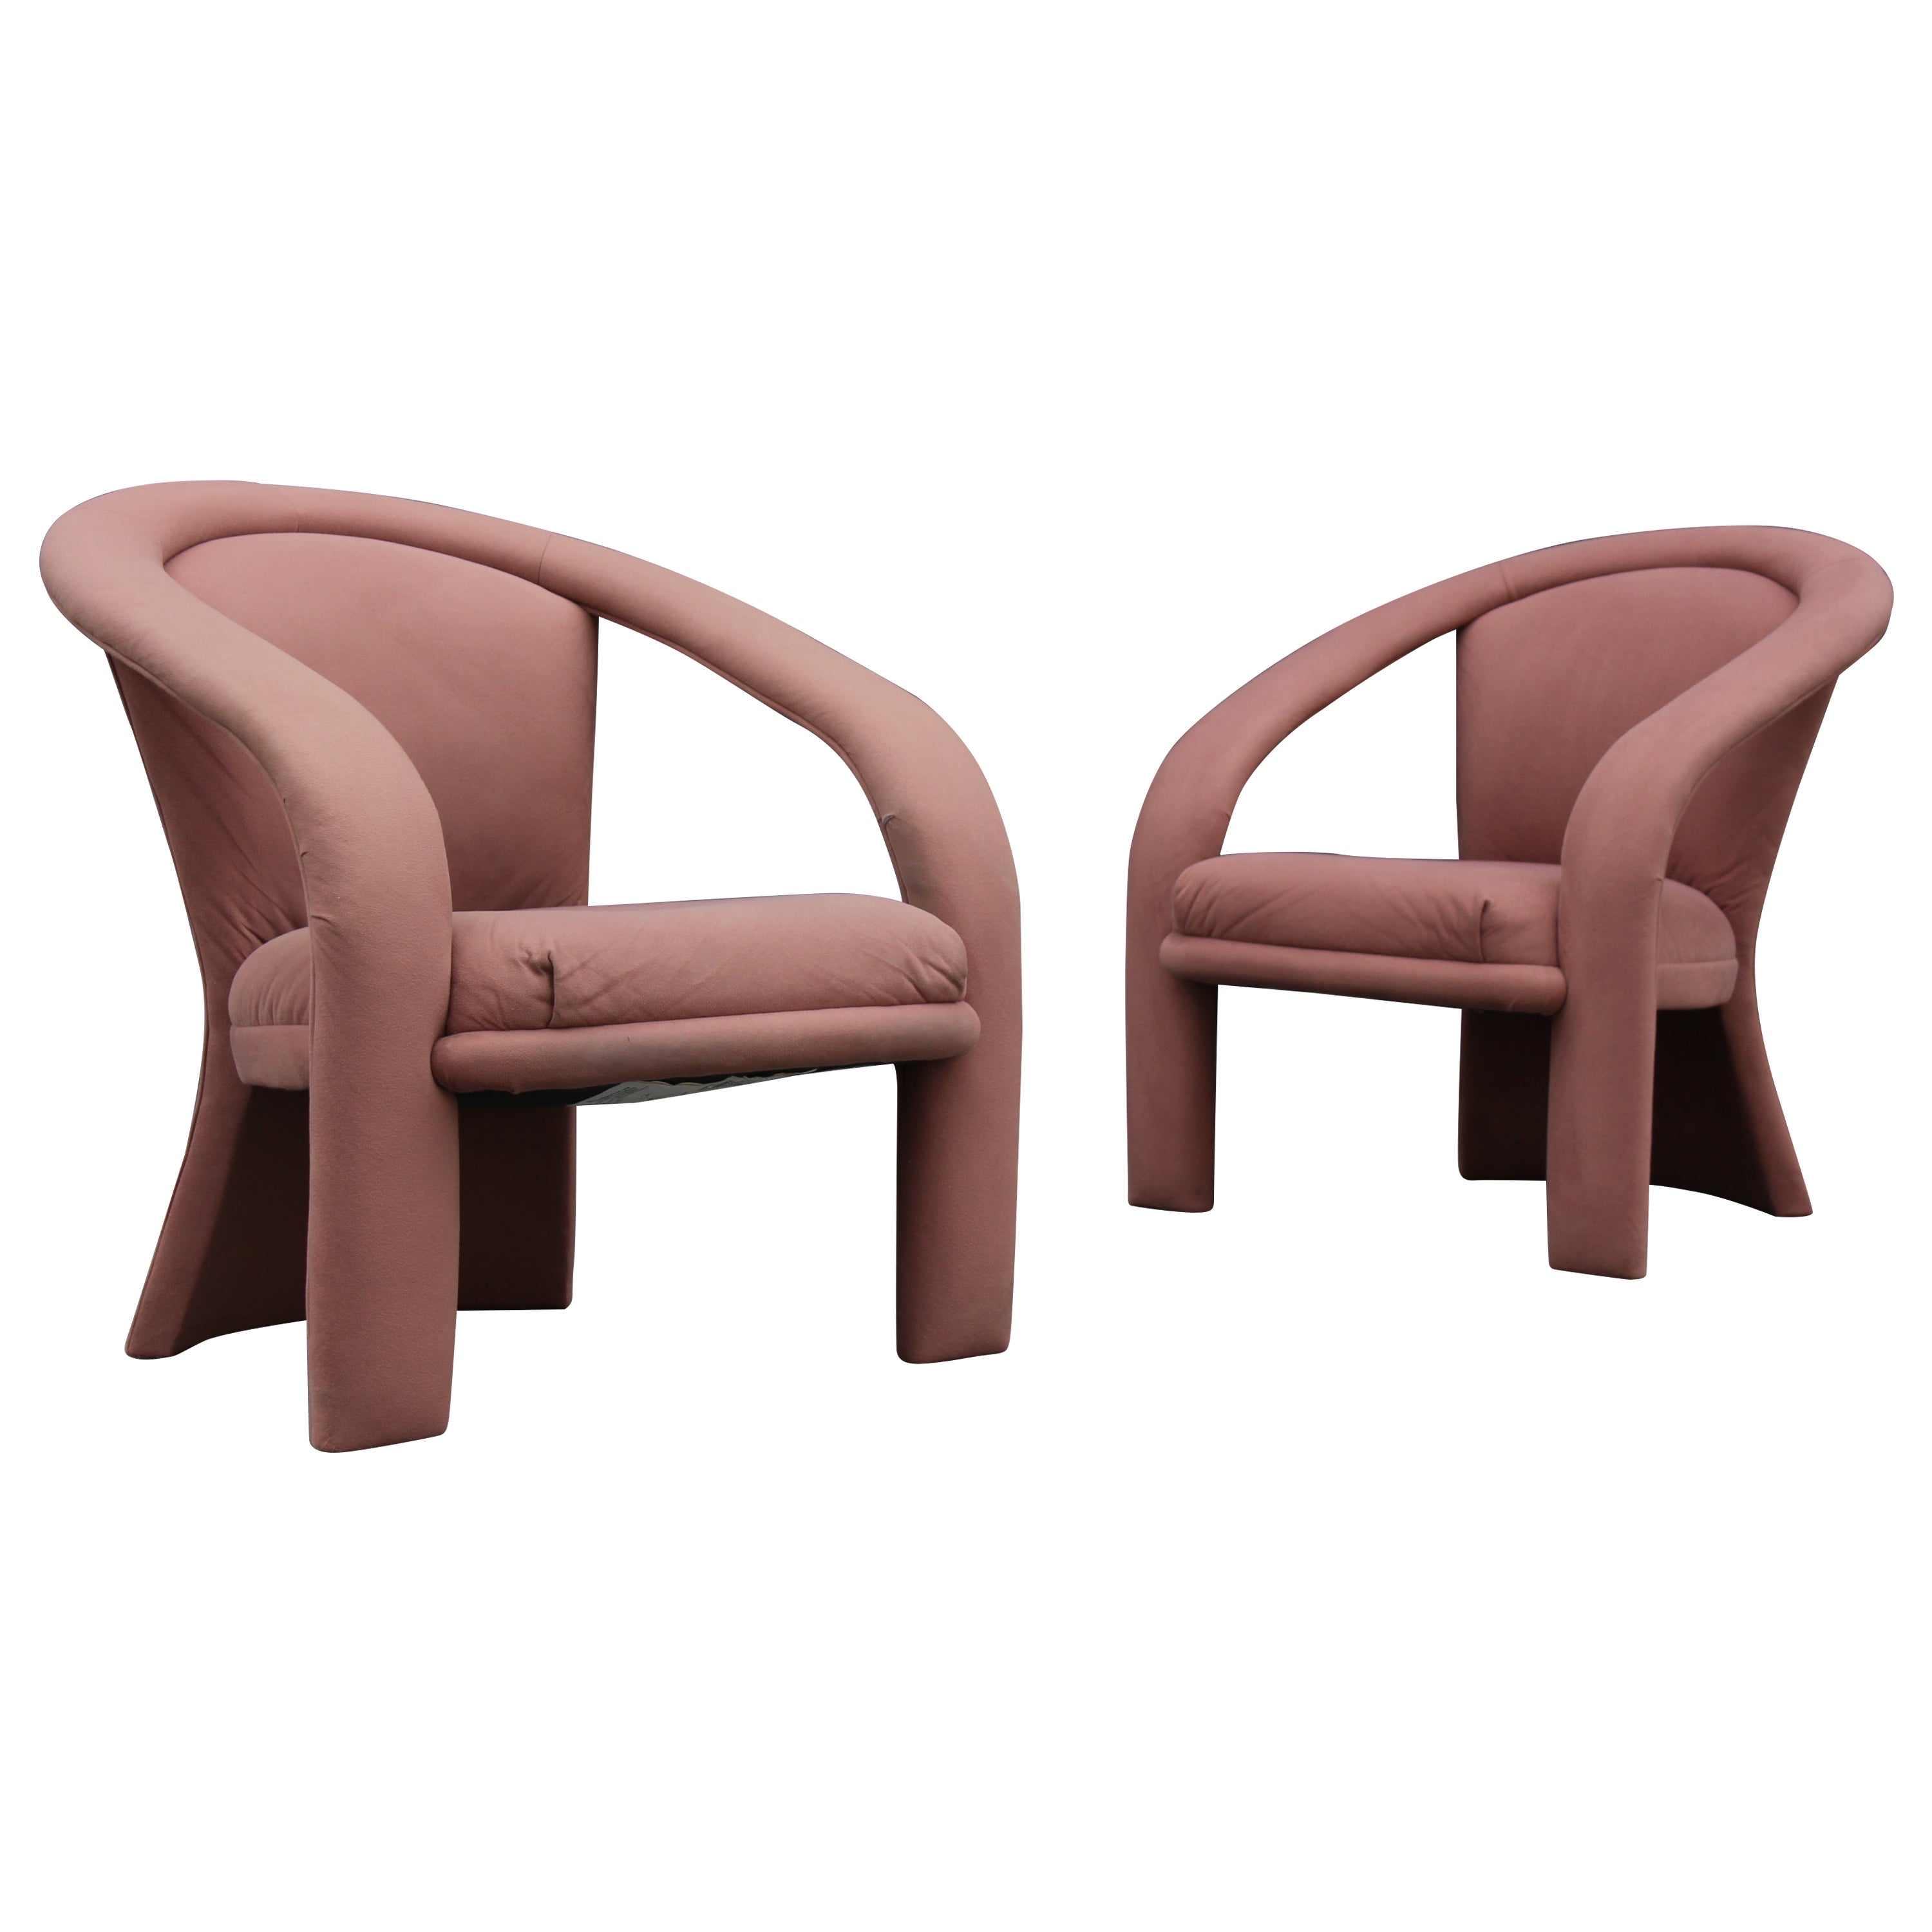 Carsons Lounge Chairs